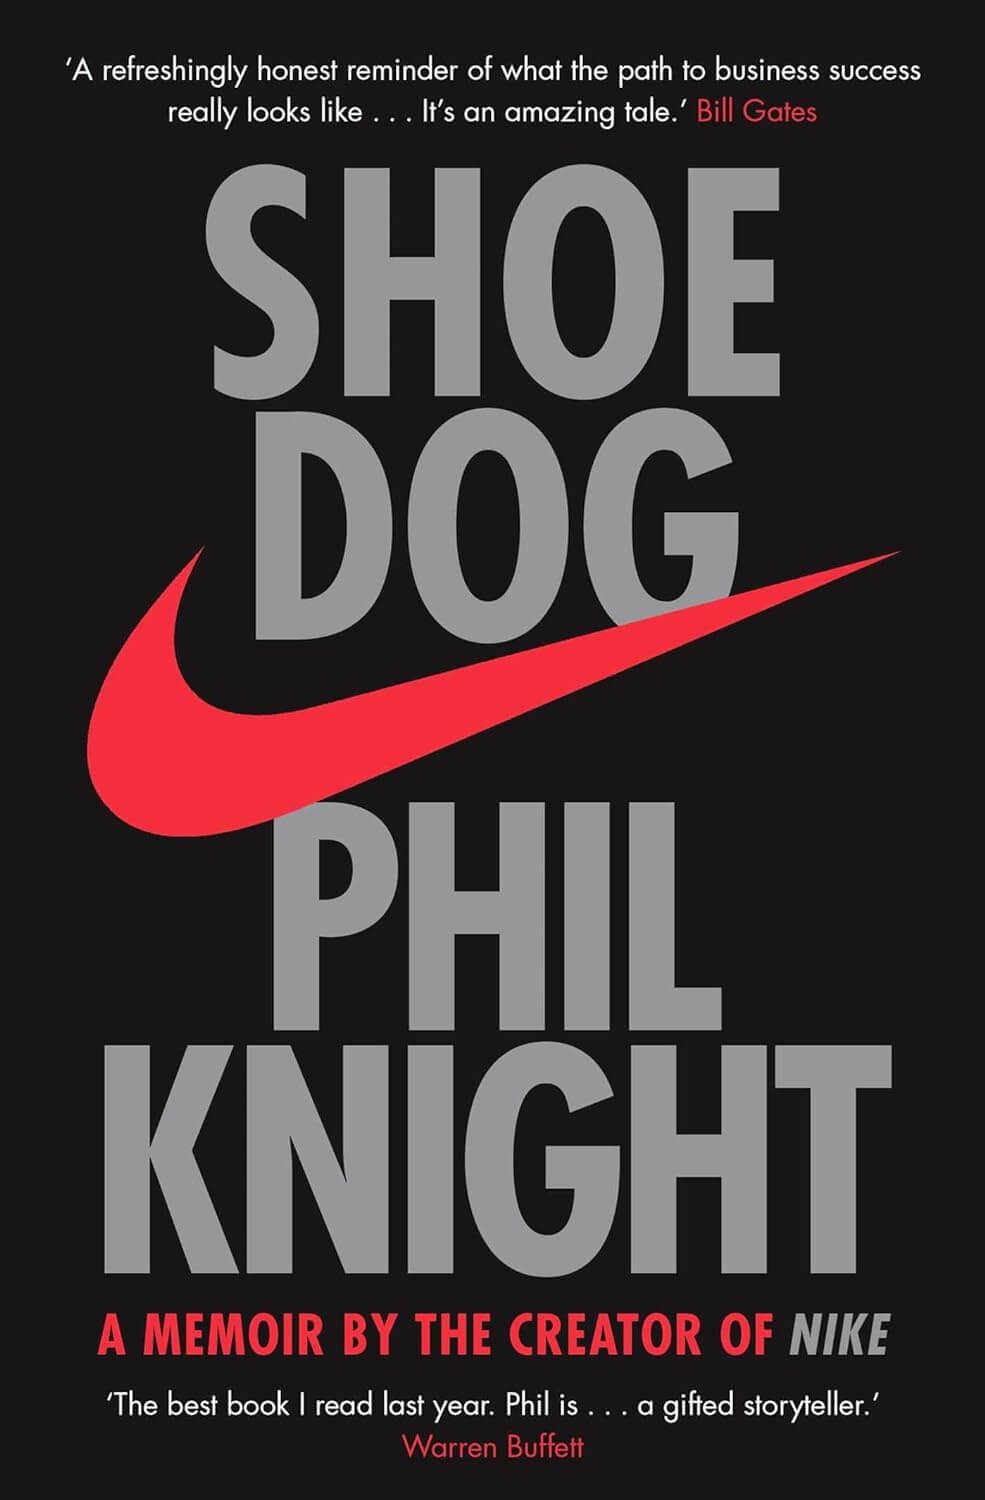 From Shoemaker to Shoe Dog: Phil Knight's Nike Origins Story